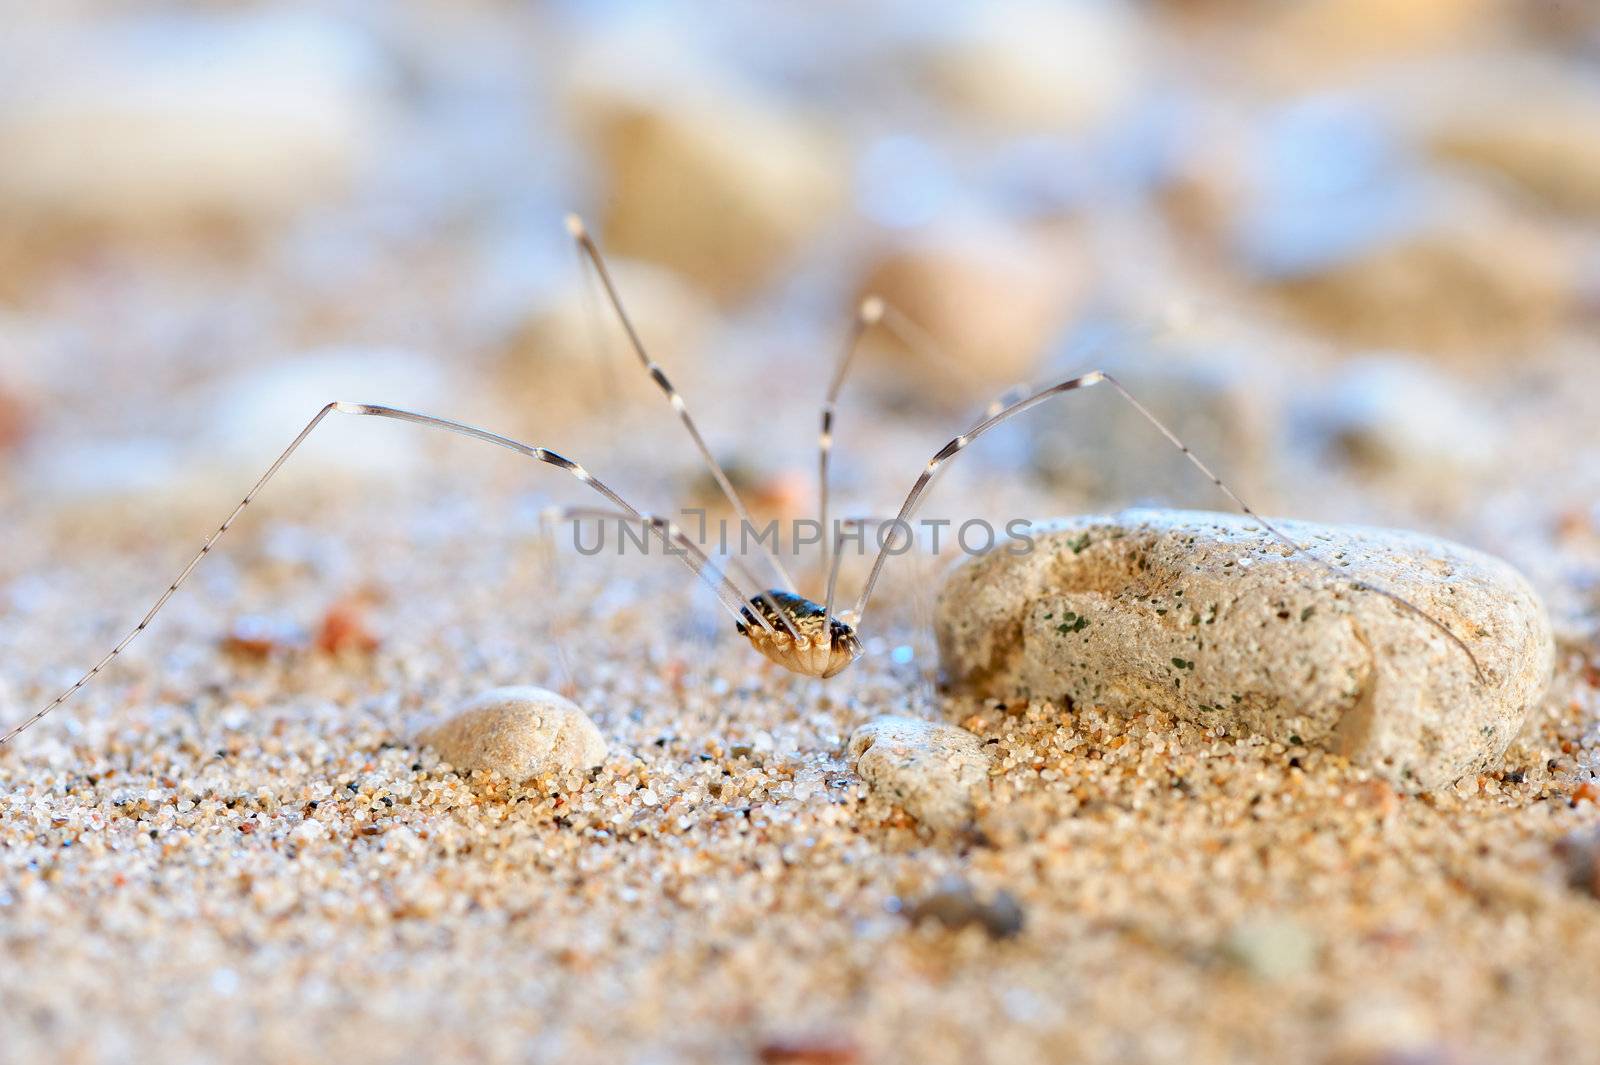 Spider movement between gravel on the sea sand